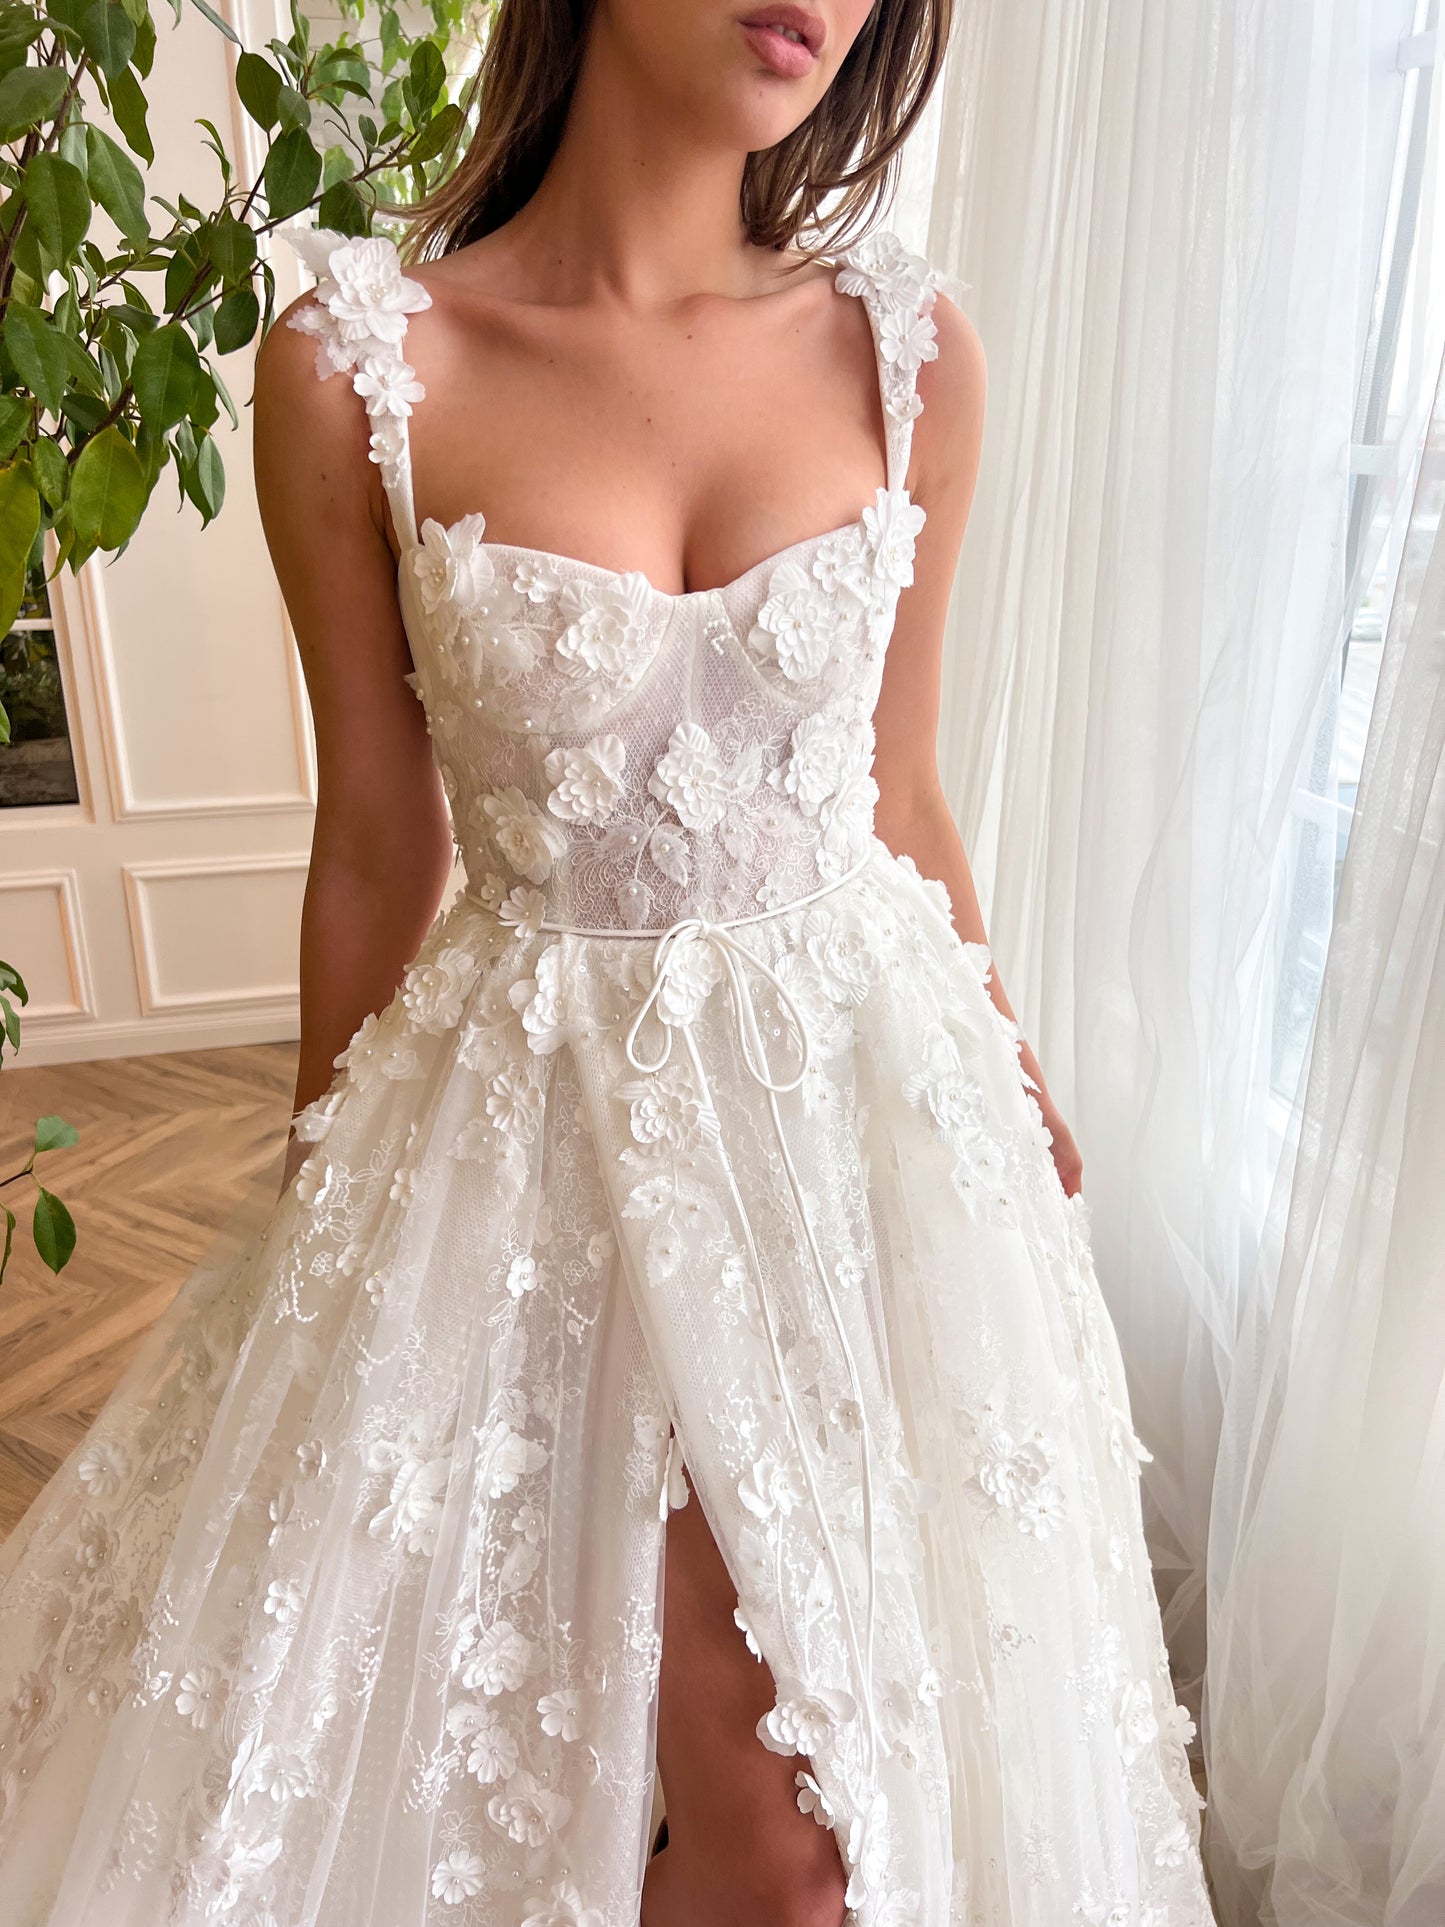 White A-Line bridal dress with straps, flowers and embroidery